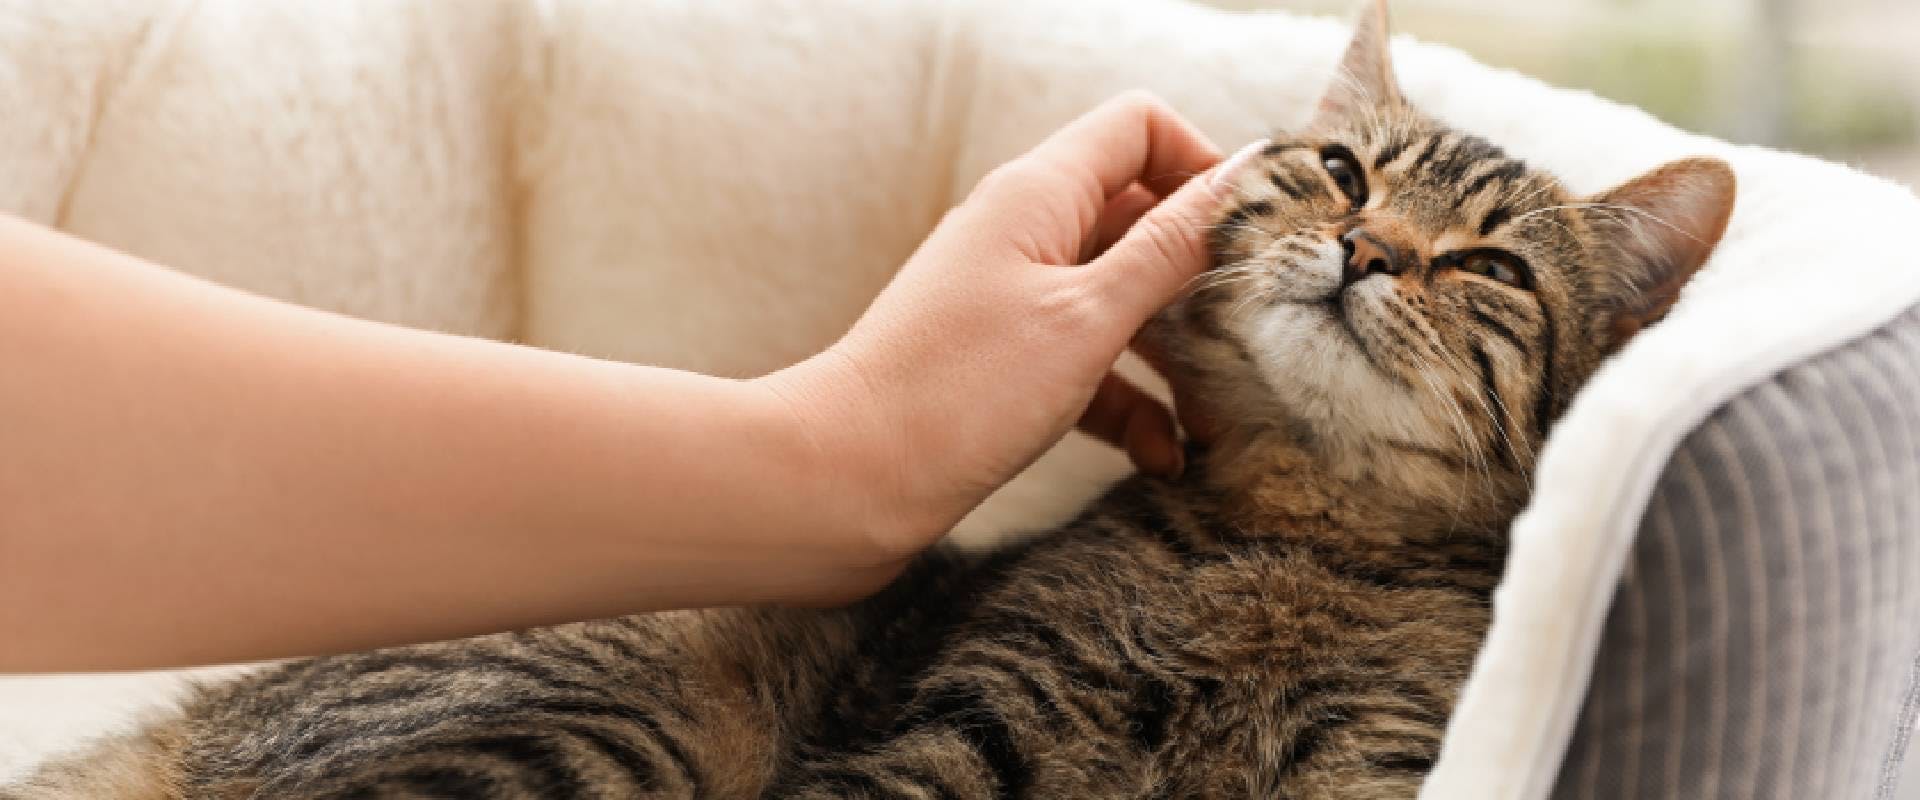 Person petting tabby cat